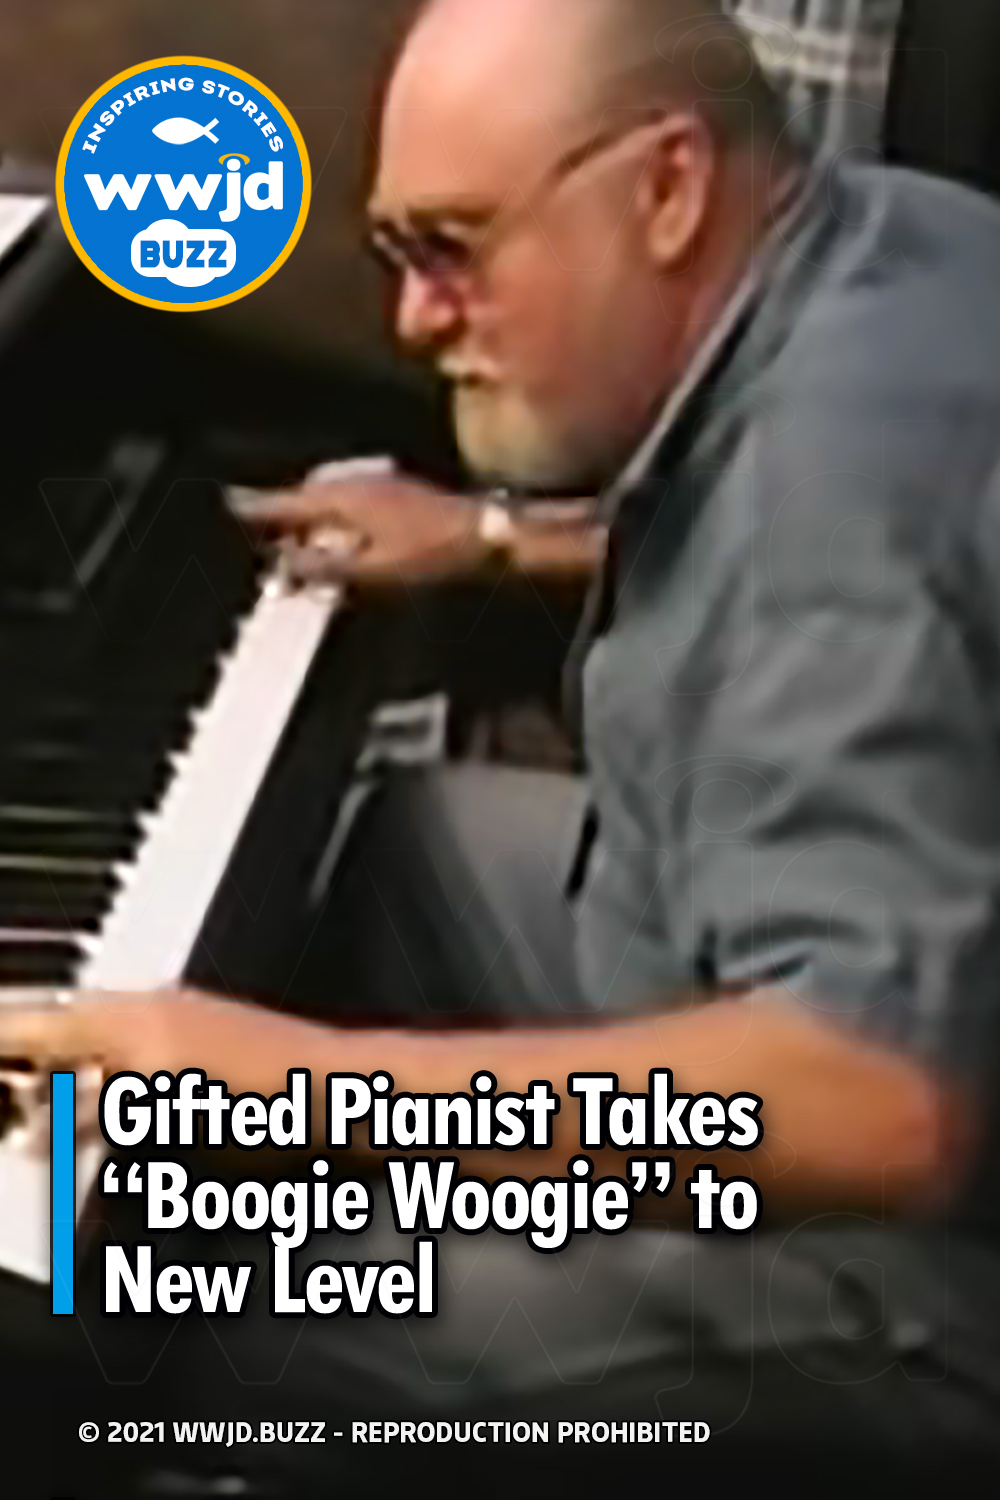 Gifted Pianist Takes “Boogie Woogie” to New Level